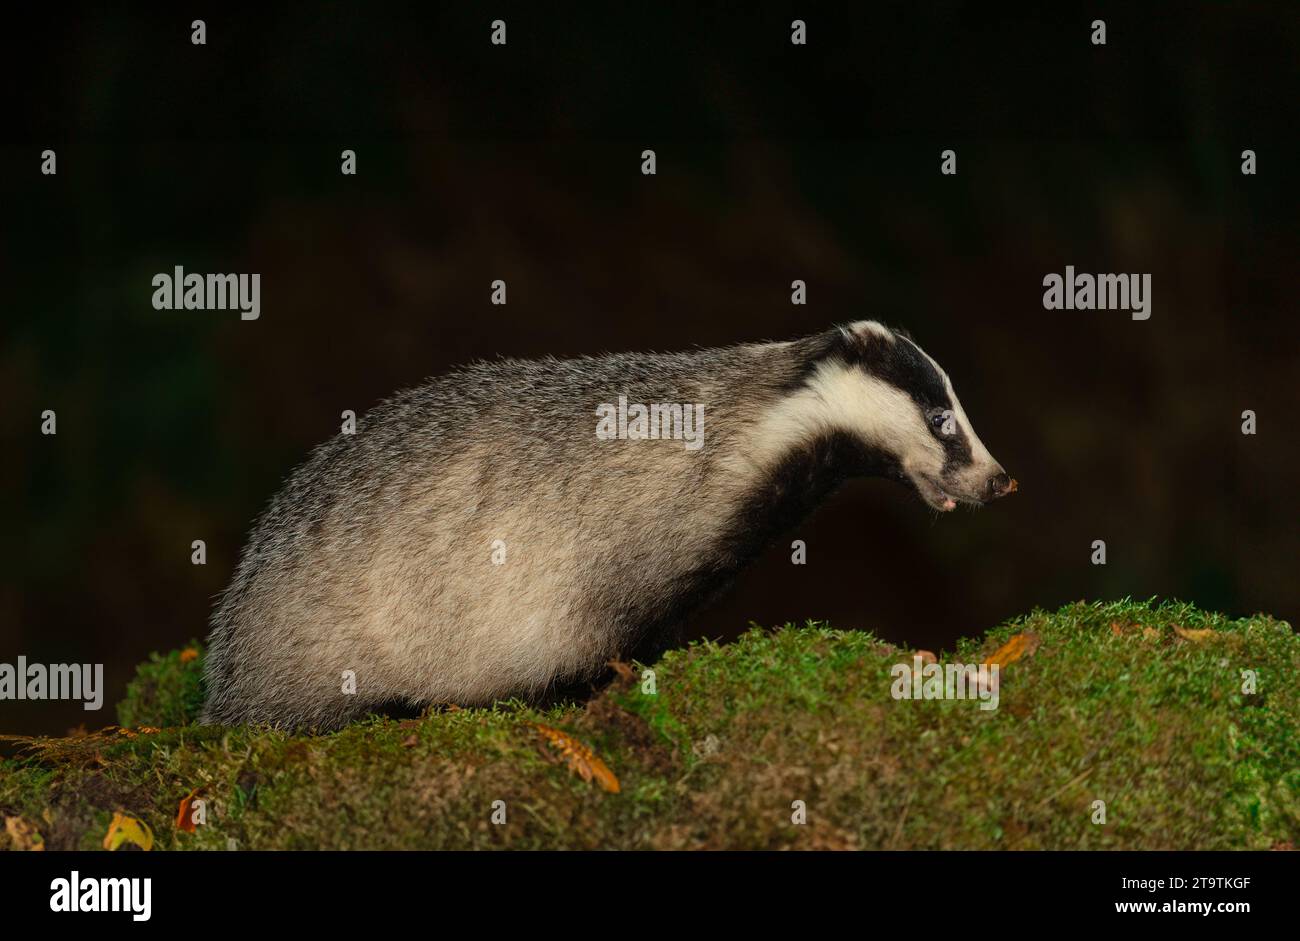 Badger, Scientific name: Meles meles.  Alert, adult badger in Autumn, facing right on green moss with leaf on her snout.   Horizontal.  Space for copy Stock Photo